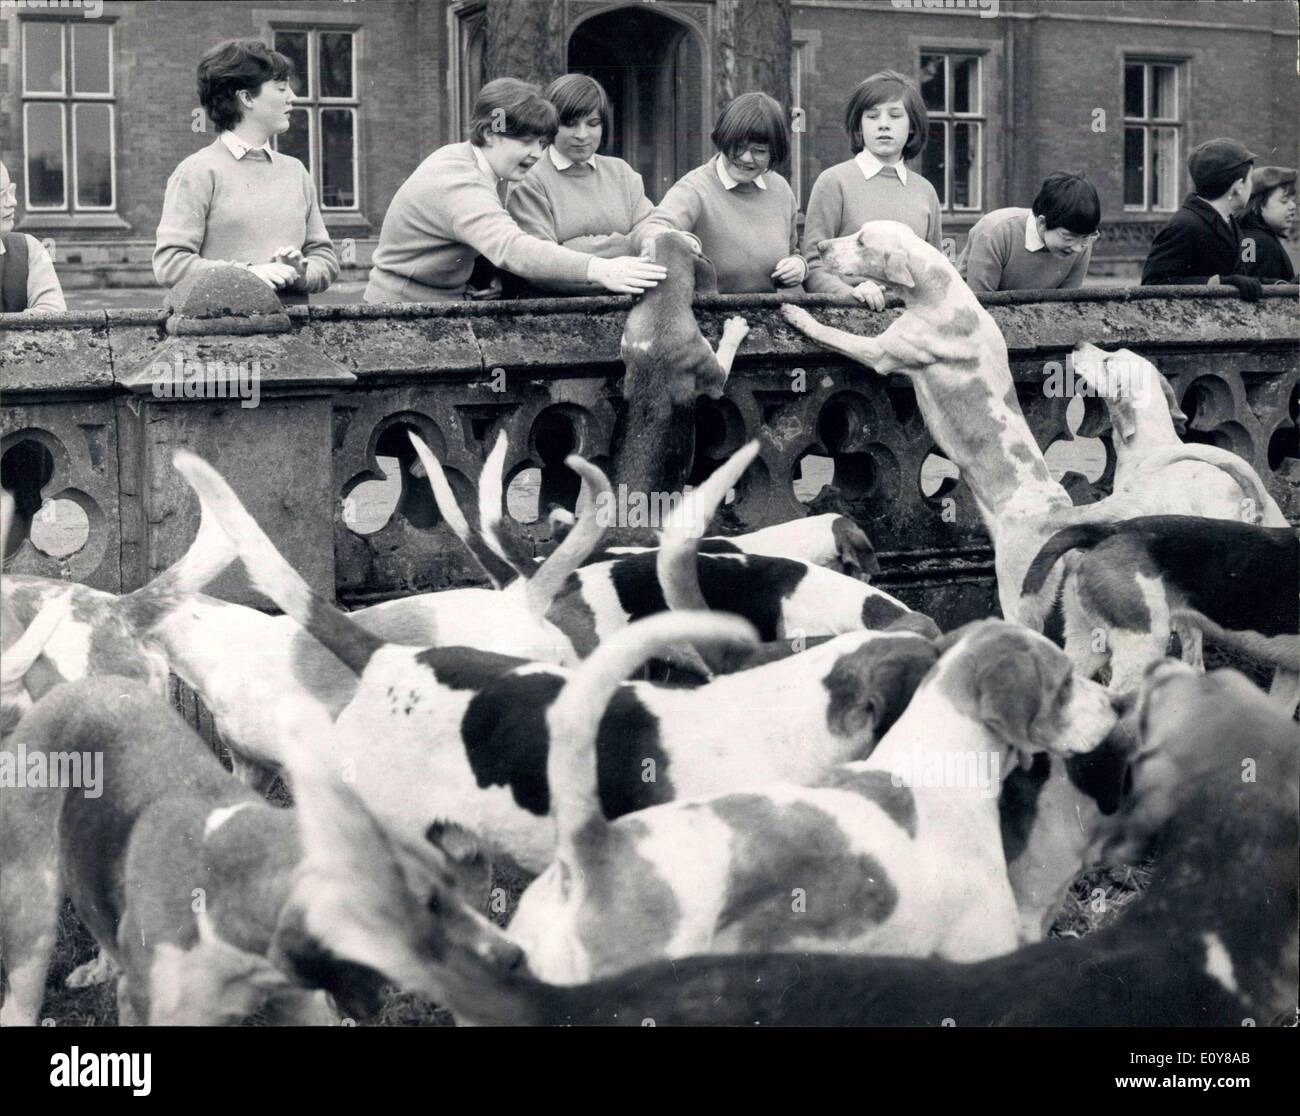 Feb. 01, 1969 - The Enfield Chace Foxhounds move off from Broxbourne School Herts ? The Enfield Chace Foxhounds meet this morning at the Broxbourne School for Girls in Broxbourne, Herts, giving the pupils a grand opportunity to see the colourful turn-out of the hunt meet. Photo Shows: The hounds get friendly with some of the girls at the Broxbourne girls school this morning before moving off. Stock Photo